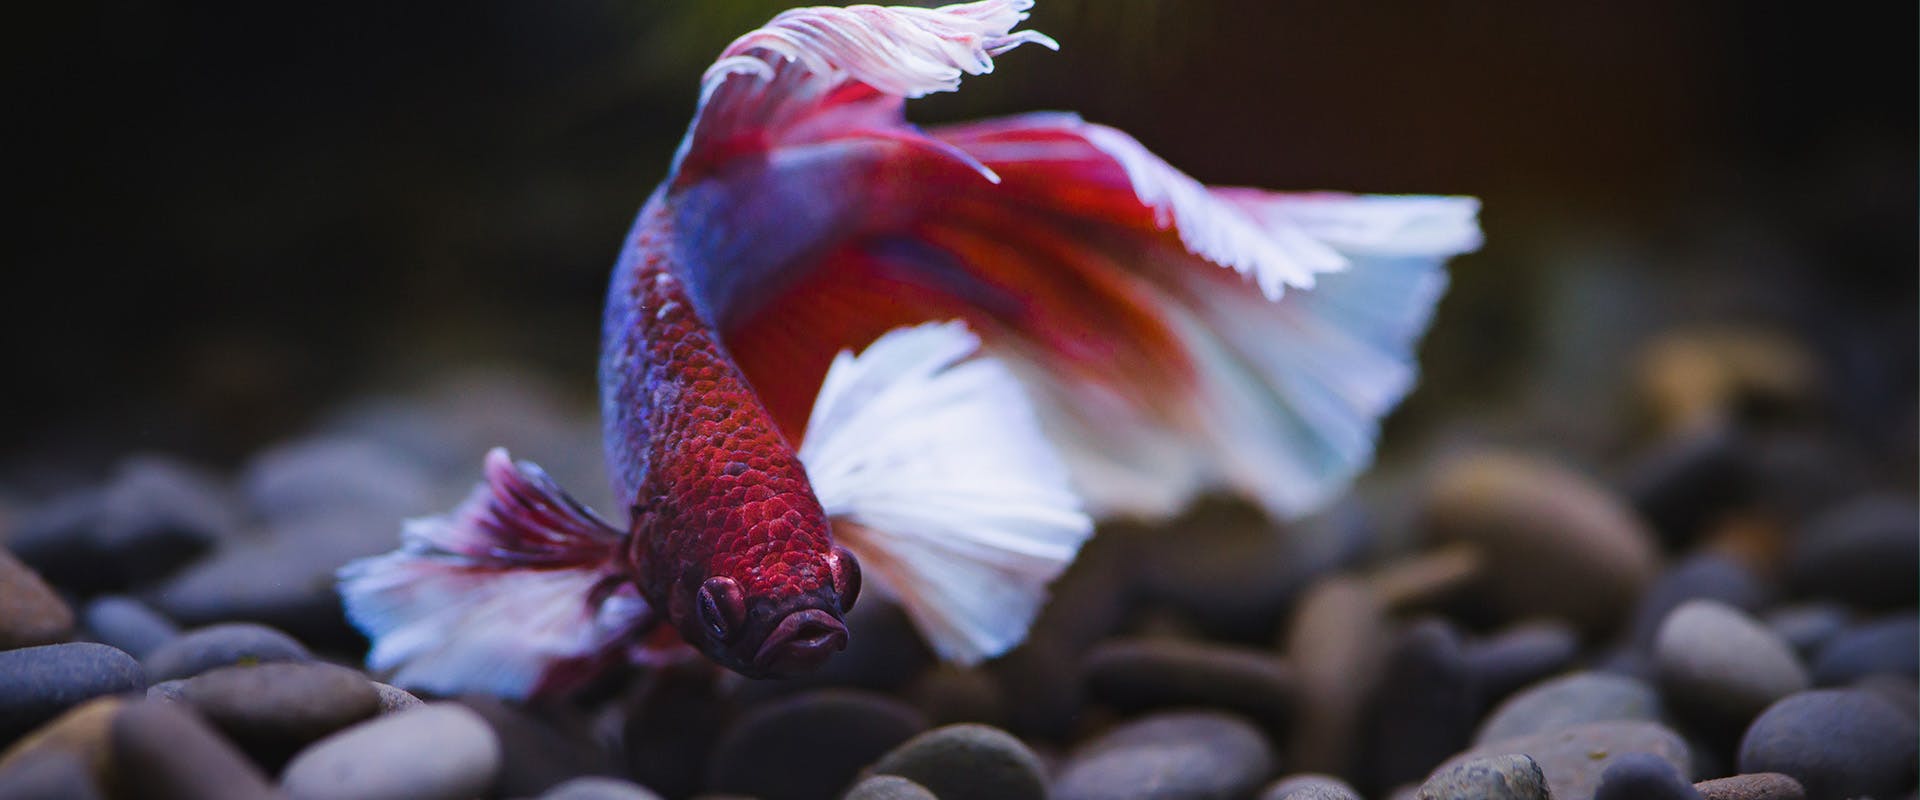 A red and white betta fish swimming in a tank